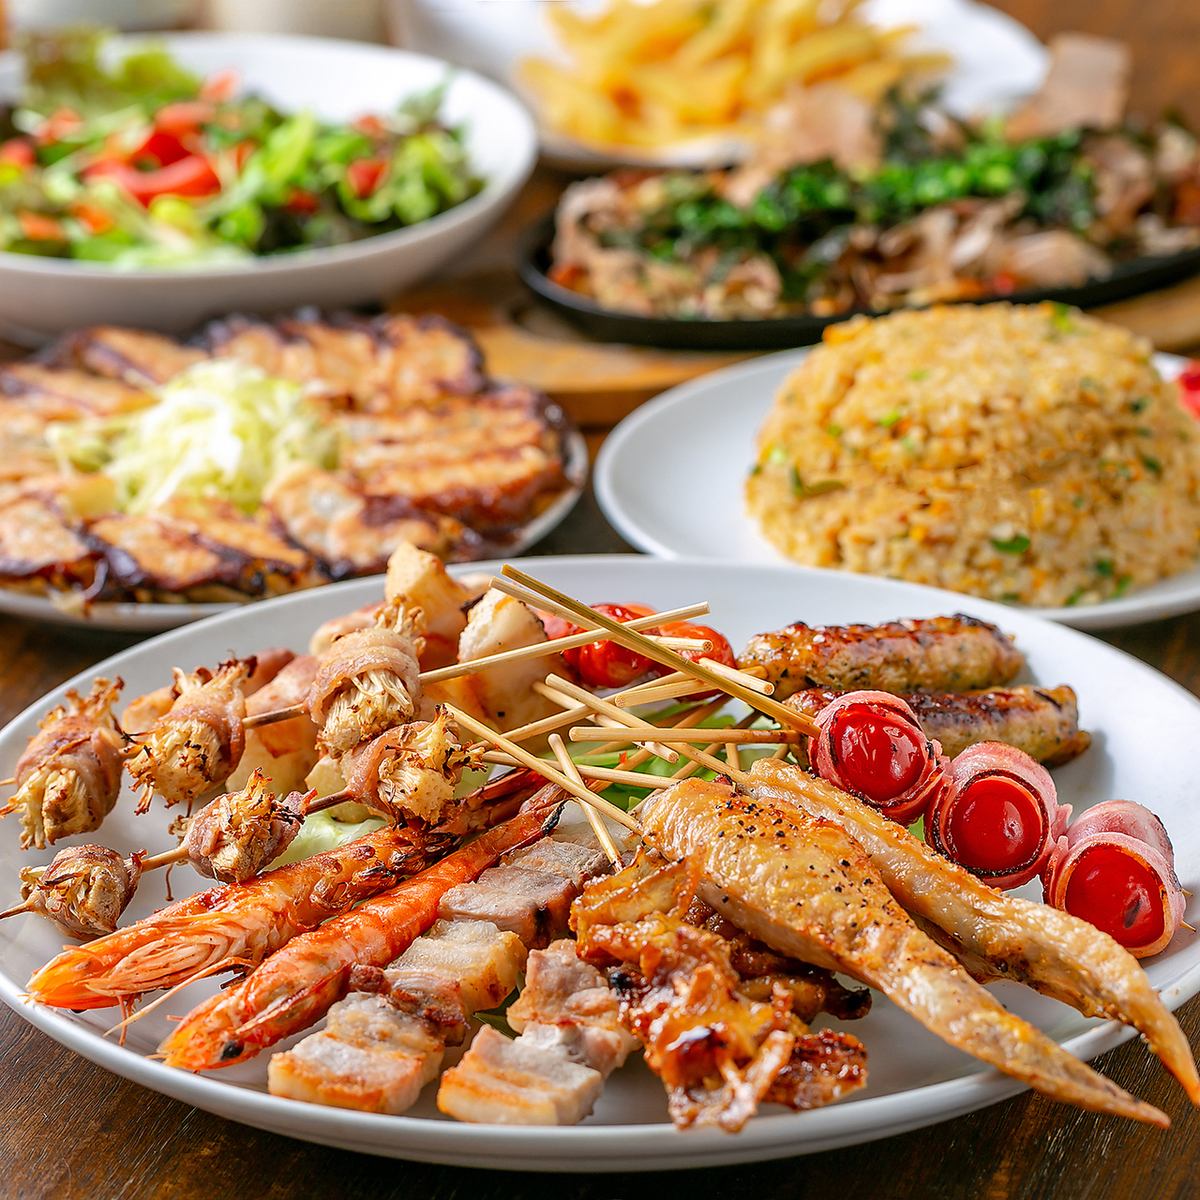 Enjoy large skewers and teppanyaki dishes at great value for money◆Courses start from 3,000 yen